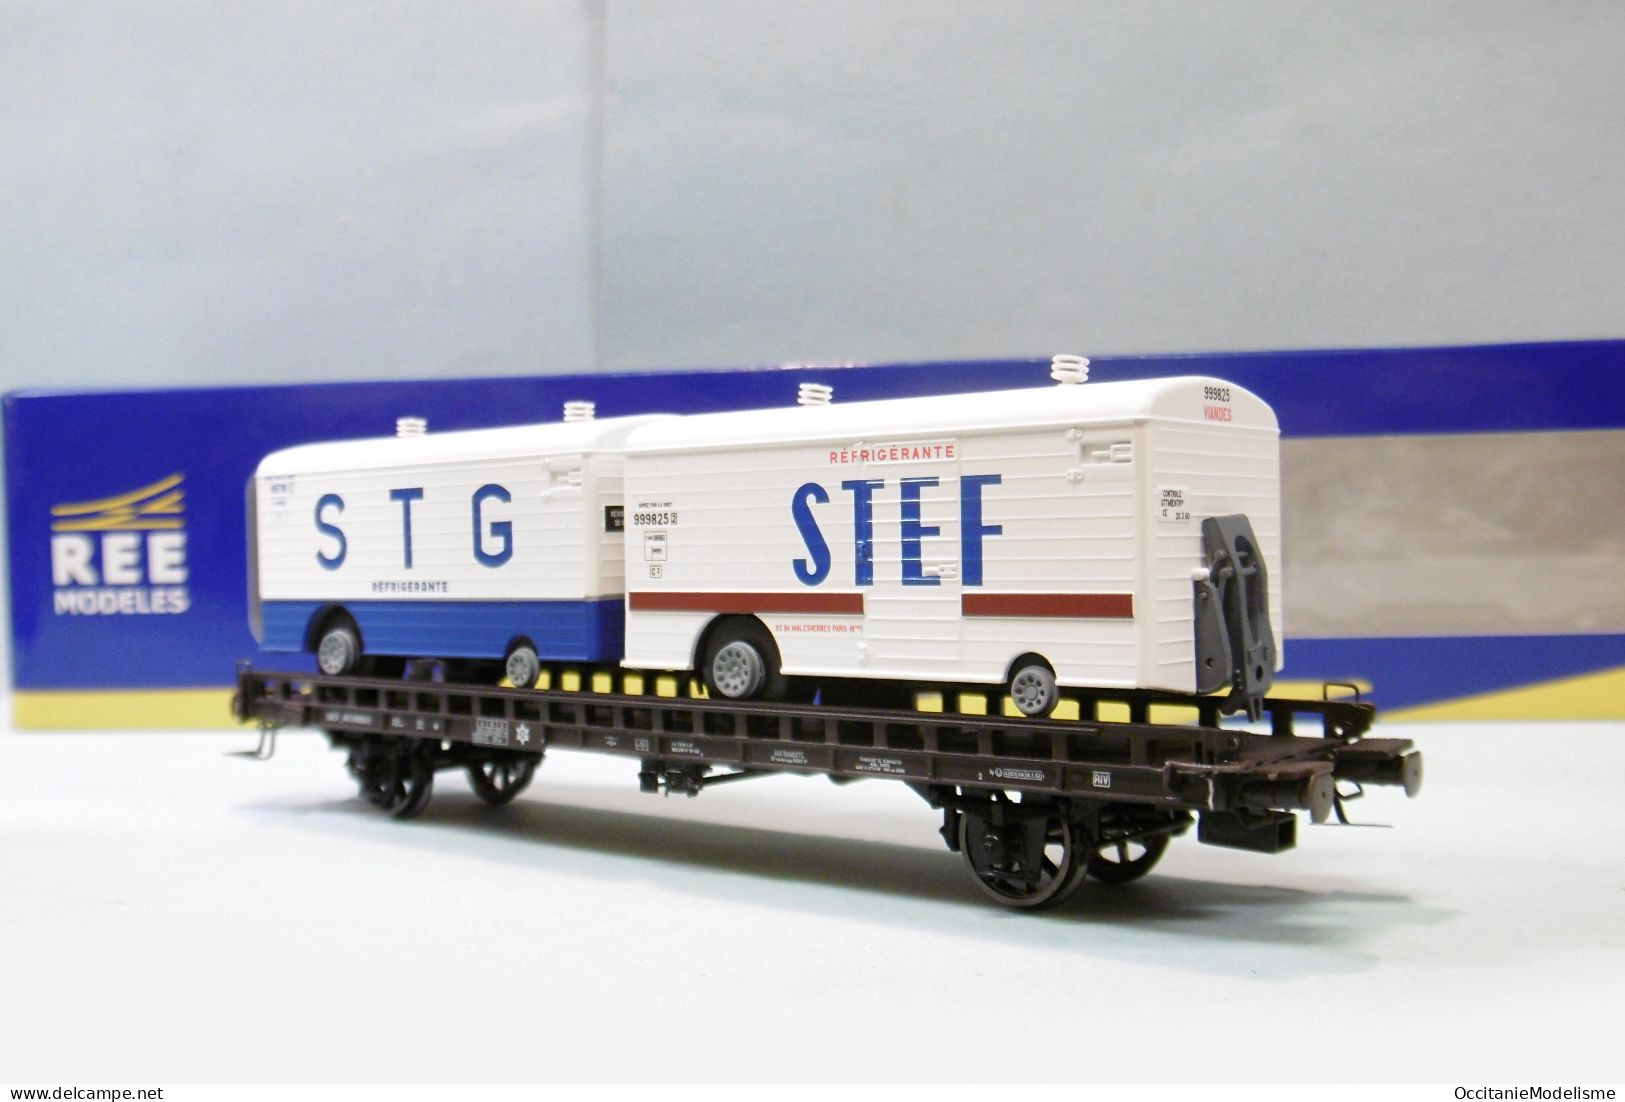 REE - WAGON UFR Biporteur STEF STG SNCF Ep. III Réf. WB-635 Neuf NBO HO 1/87 - Wagons Marchandises